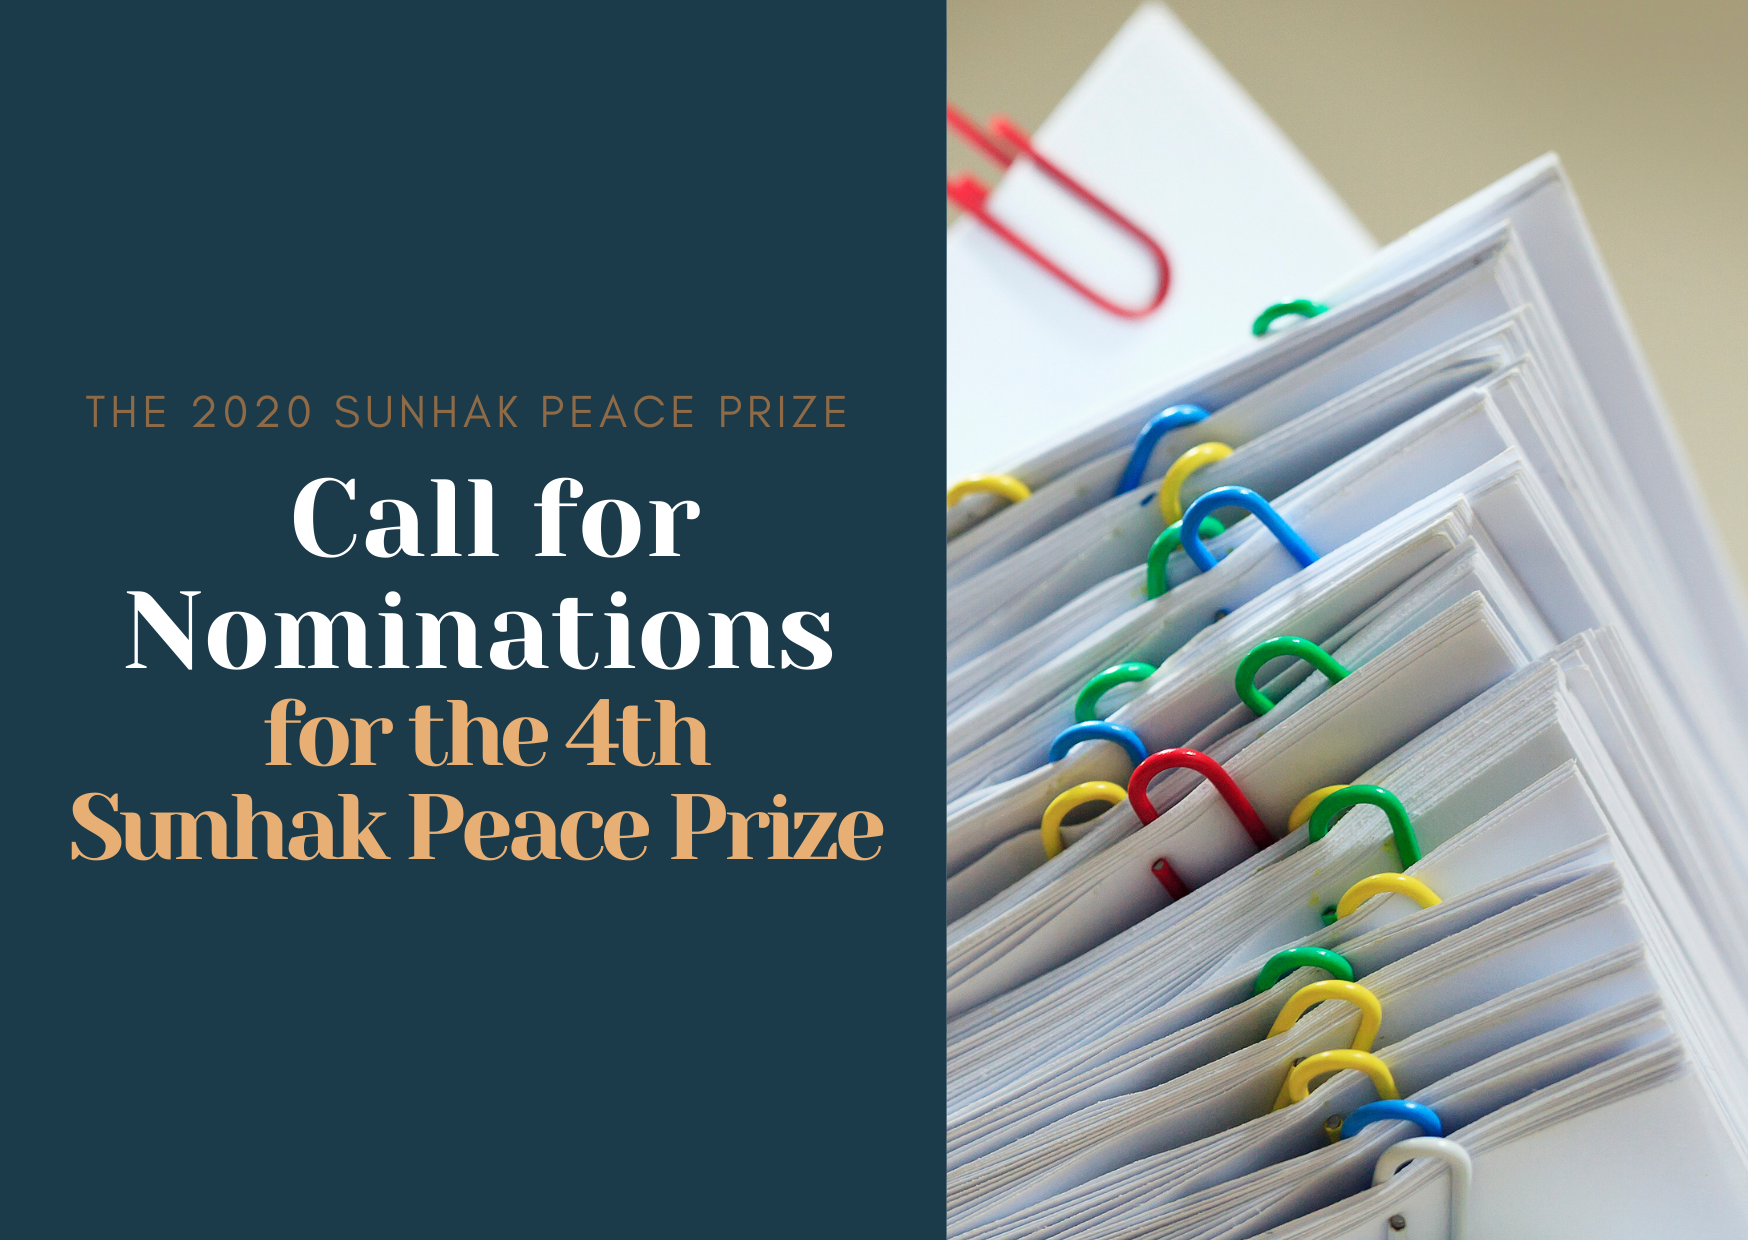 Call for Nominations for the 4th Sunhak Peace Prize 썸네일